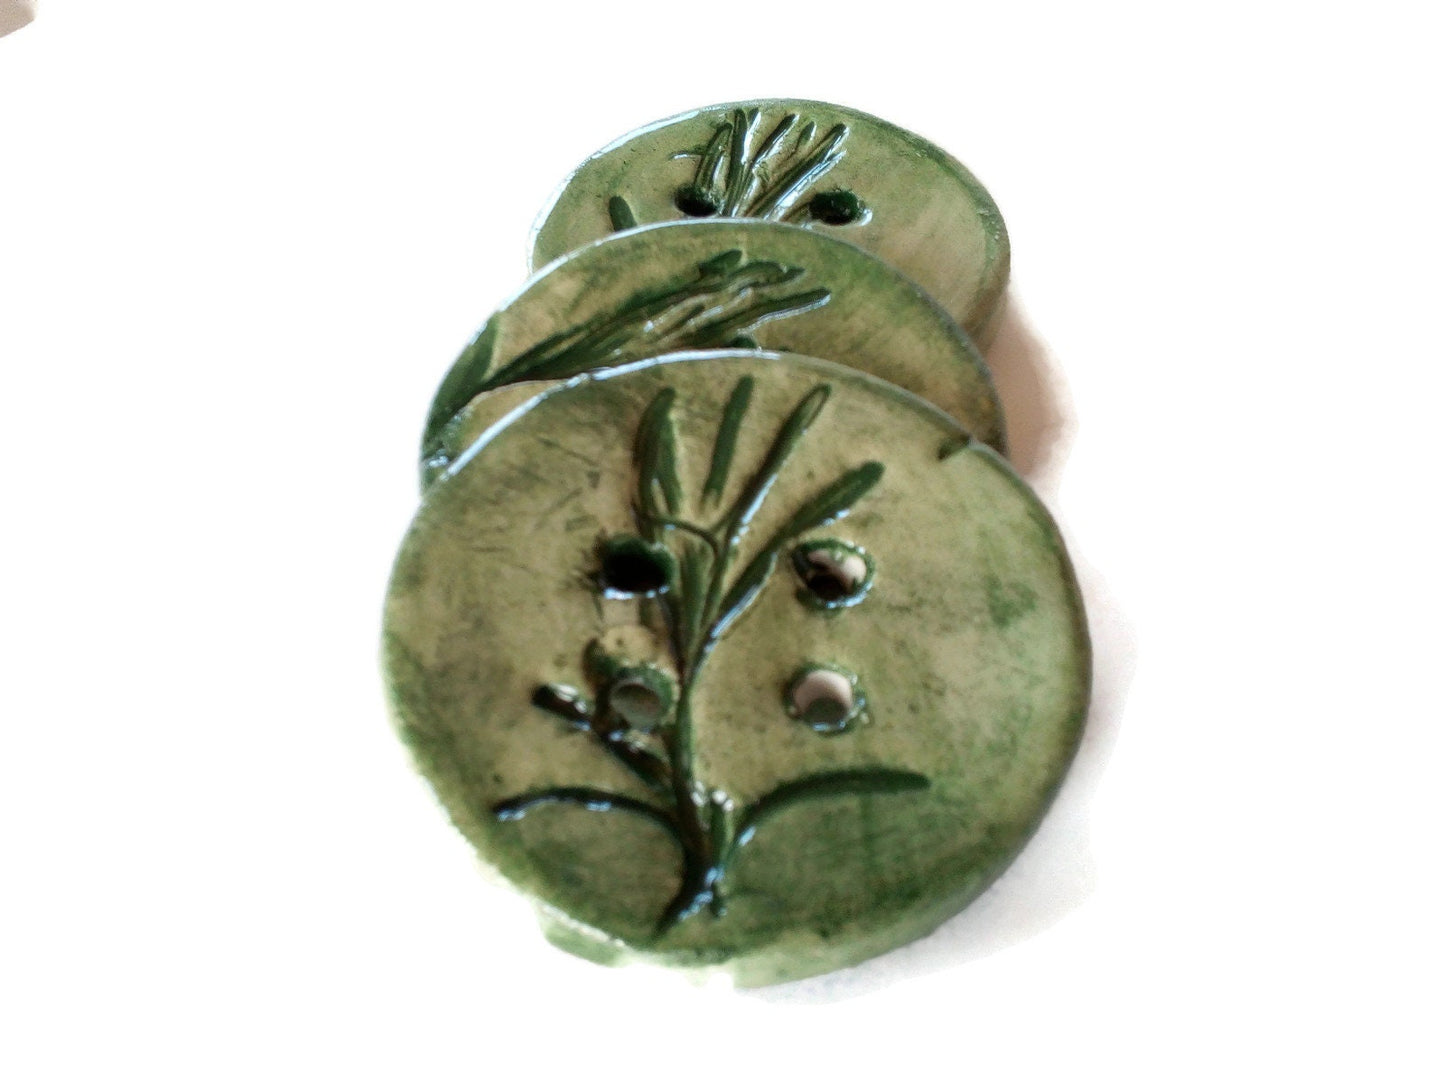 3Pcs 45mm Extra Large Handmade Ceramic Buttons, Round Sewing Buttons, Unique Rosemary Leaves Handmade Pottery Designer Buttons For Crafts - Ceramica Ana Rafael